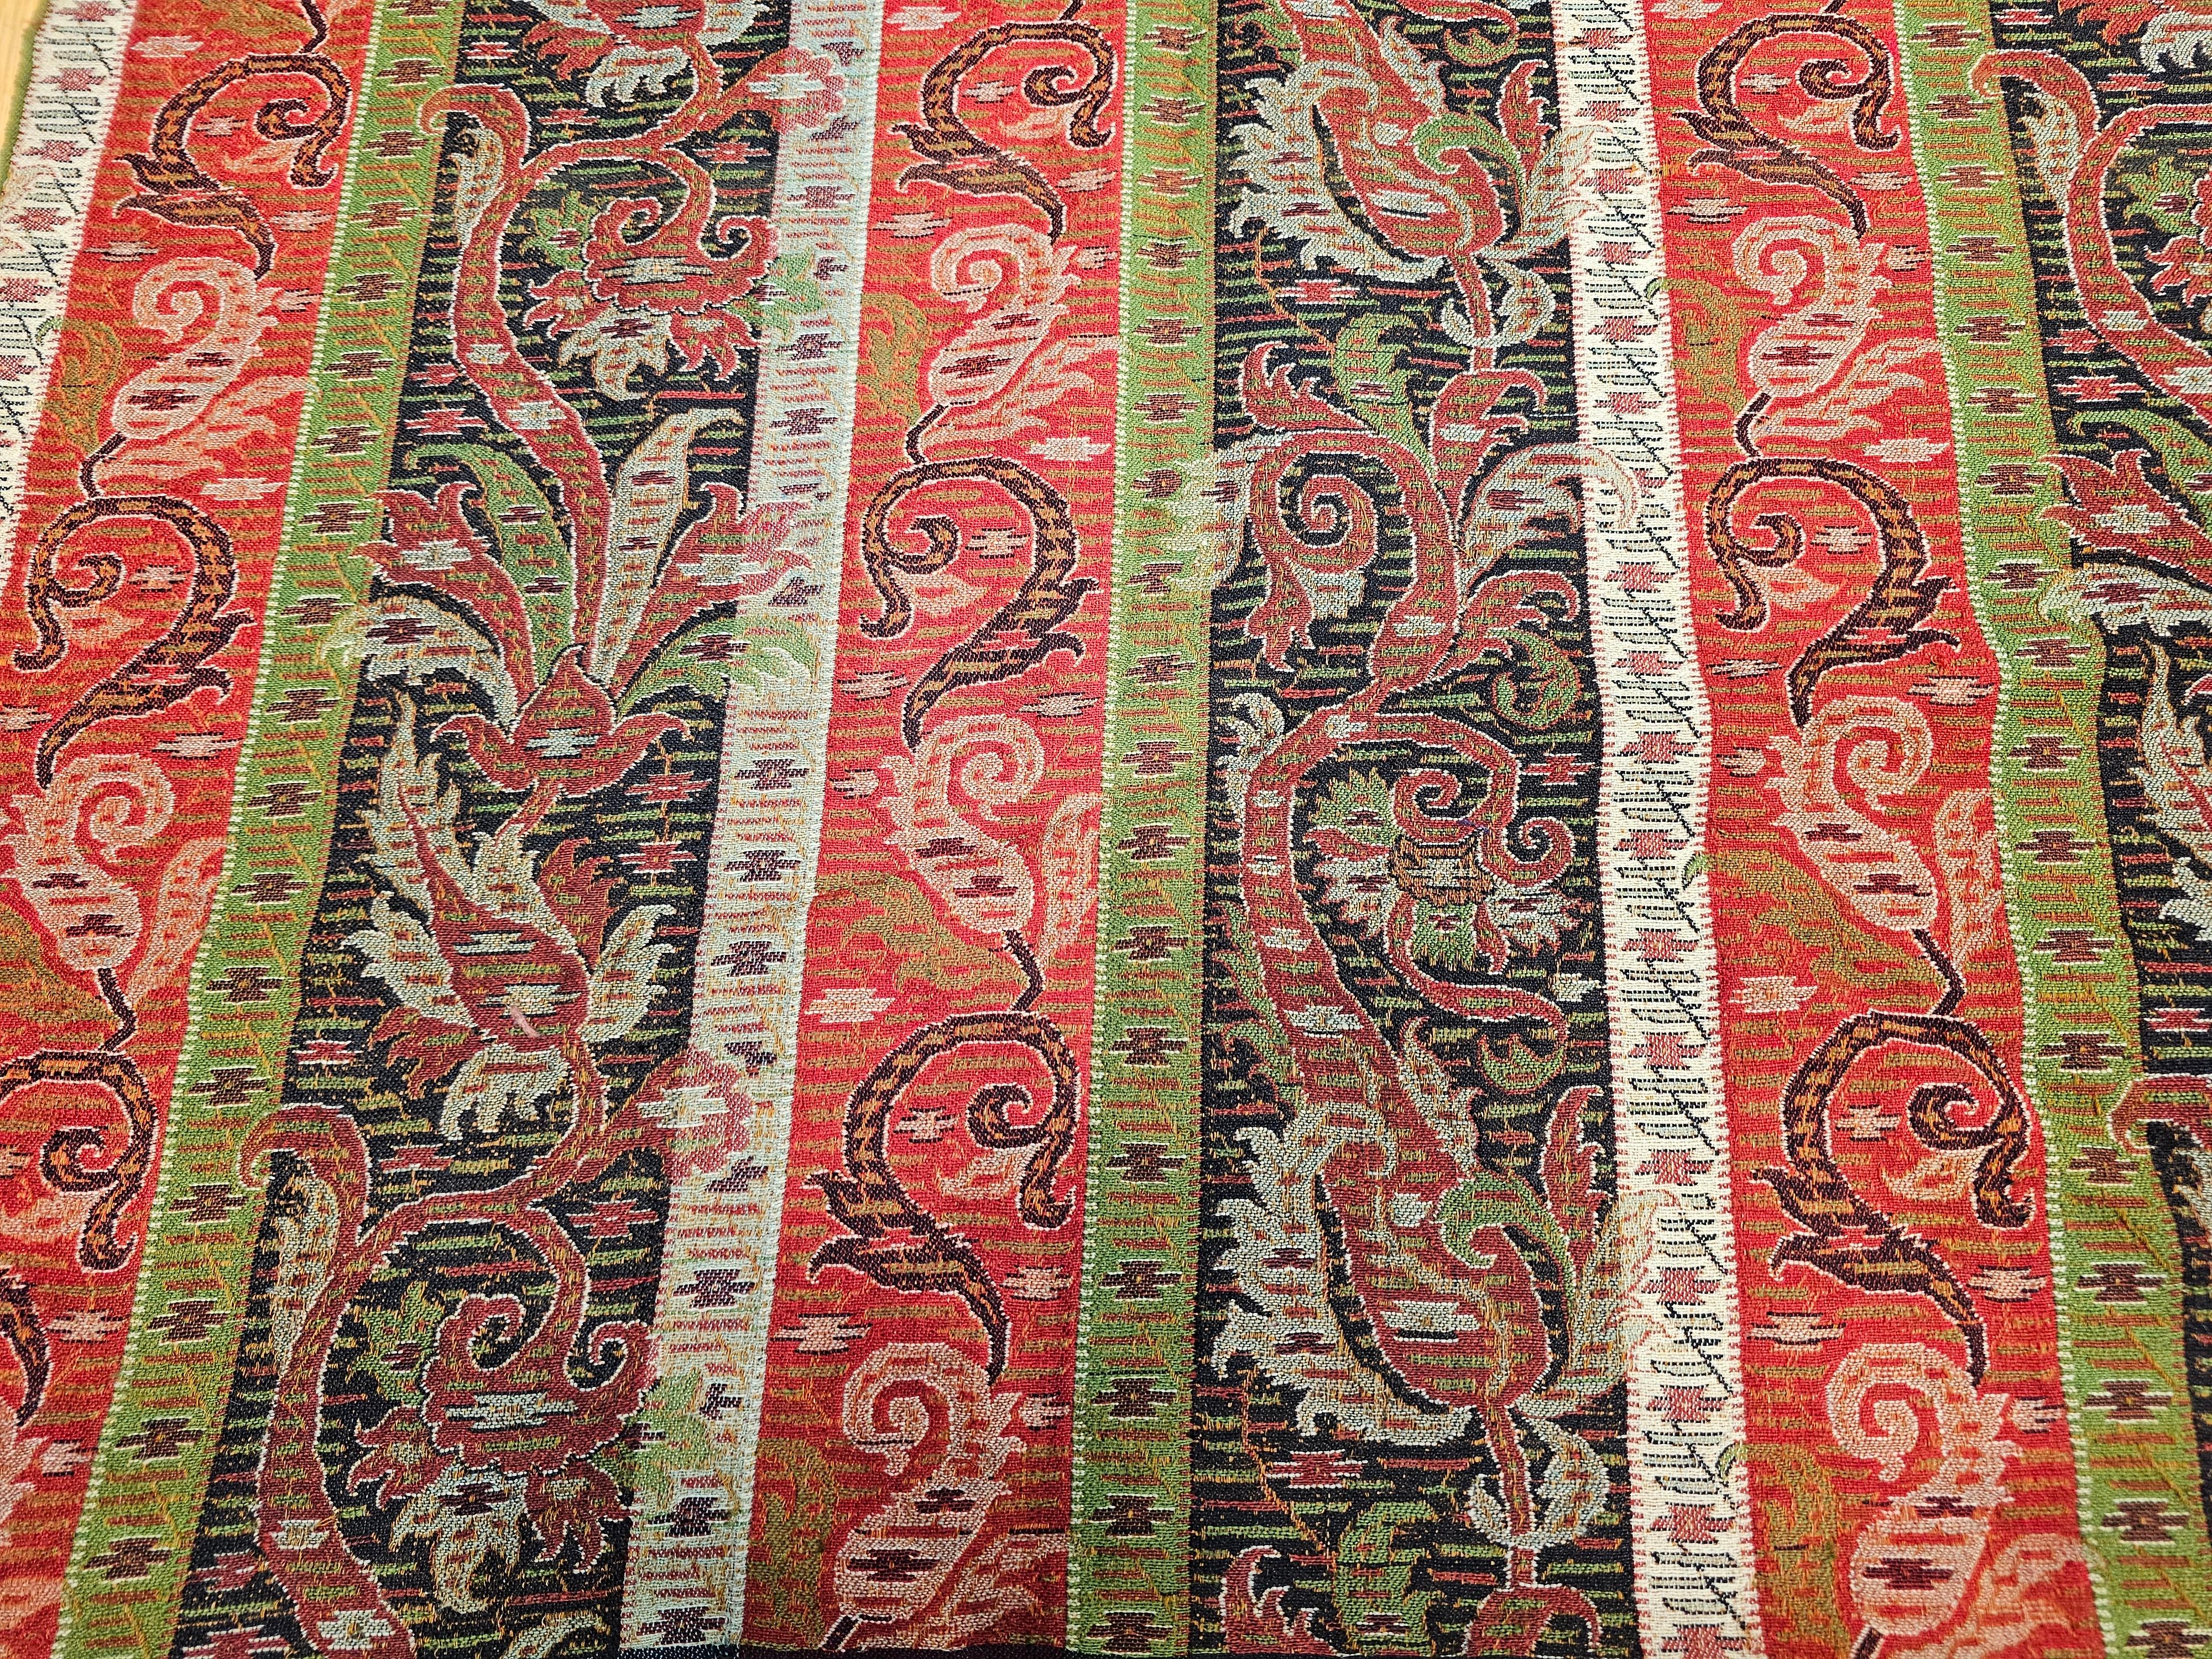 19th Century Hand-Woven Kashmiri Paisley Shawl in Brick Red, Ivory, Black, Green In Good Condition For Sale In Barrington, IL